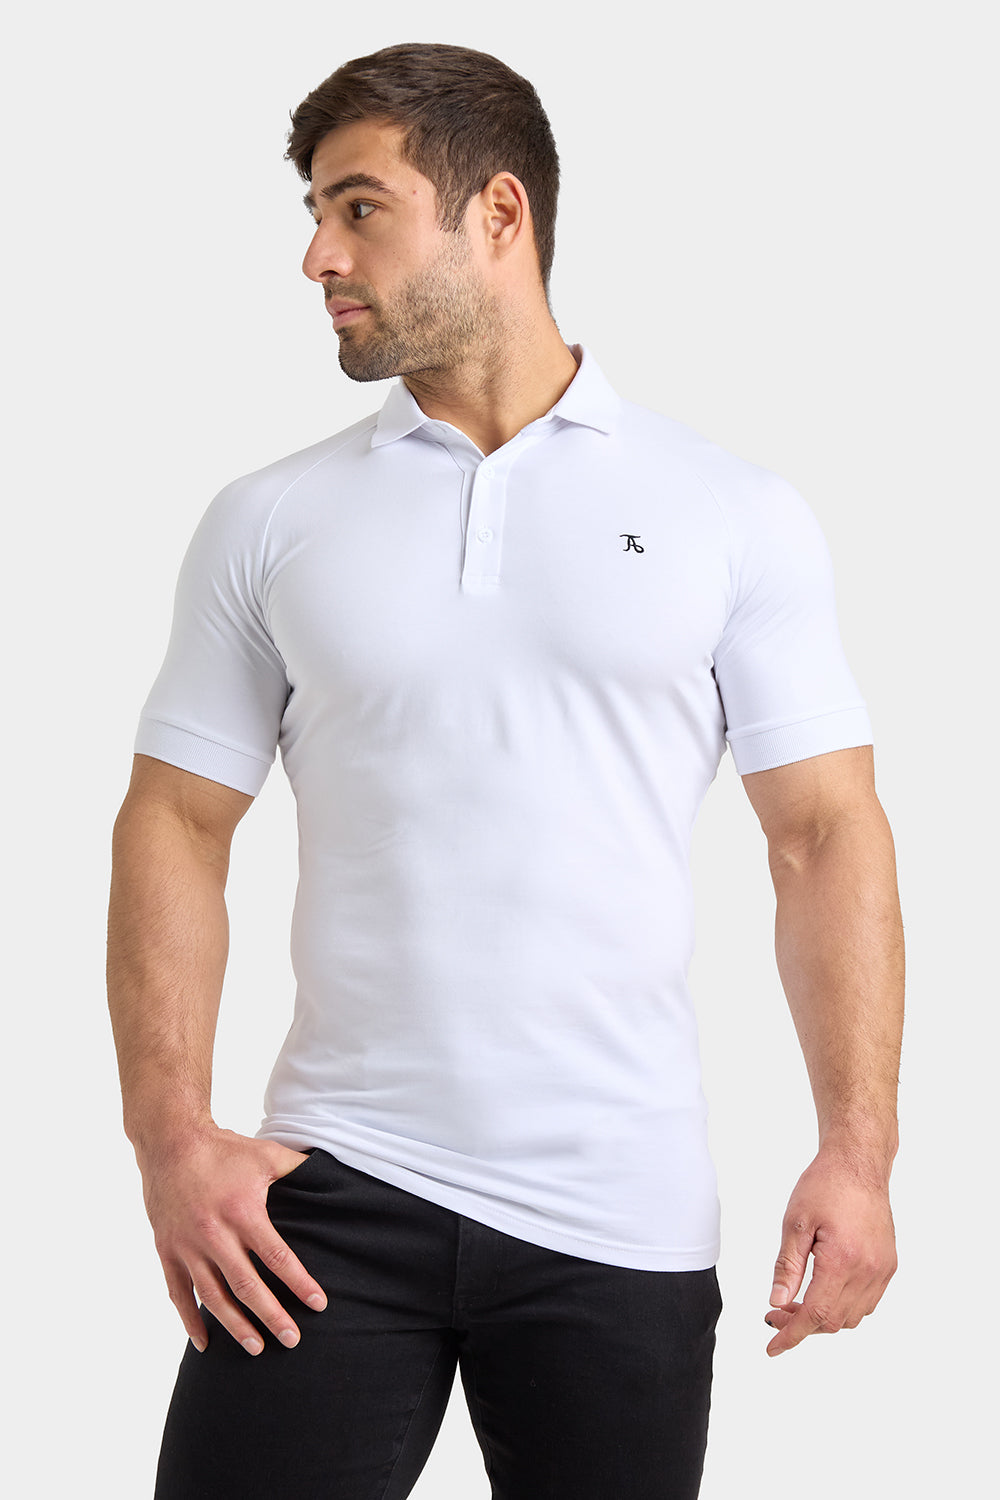 Muscle Fit Polo Shirt in White - TAILORED ATHLETE - ROW